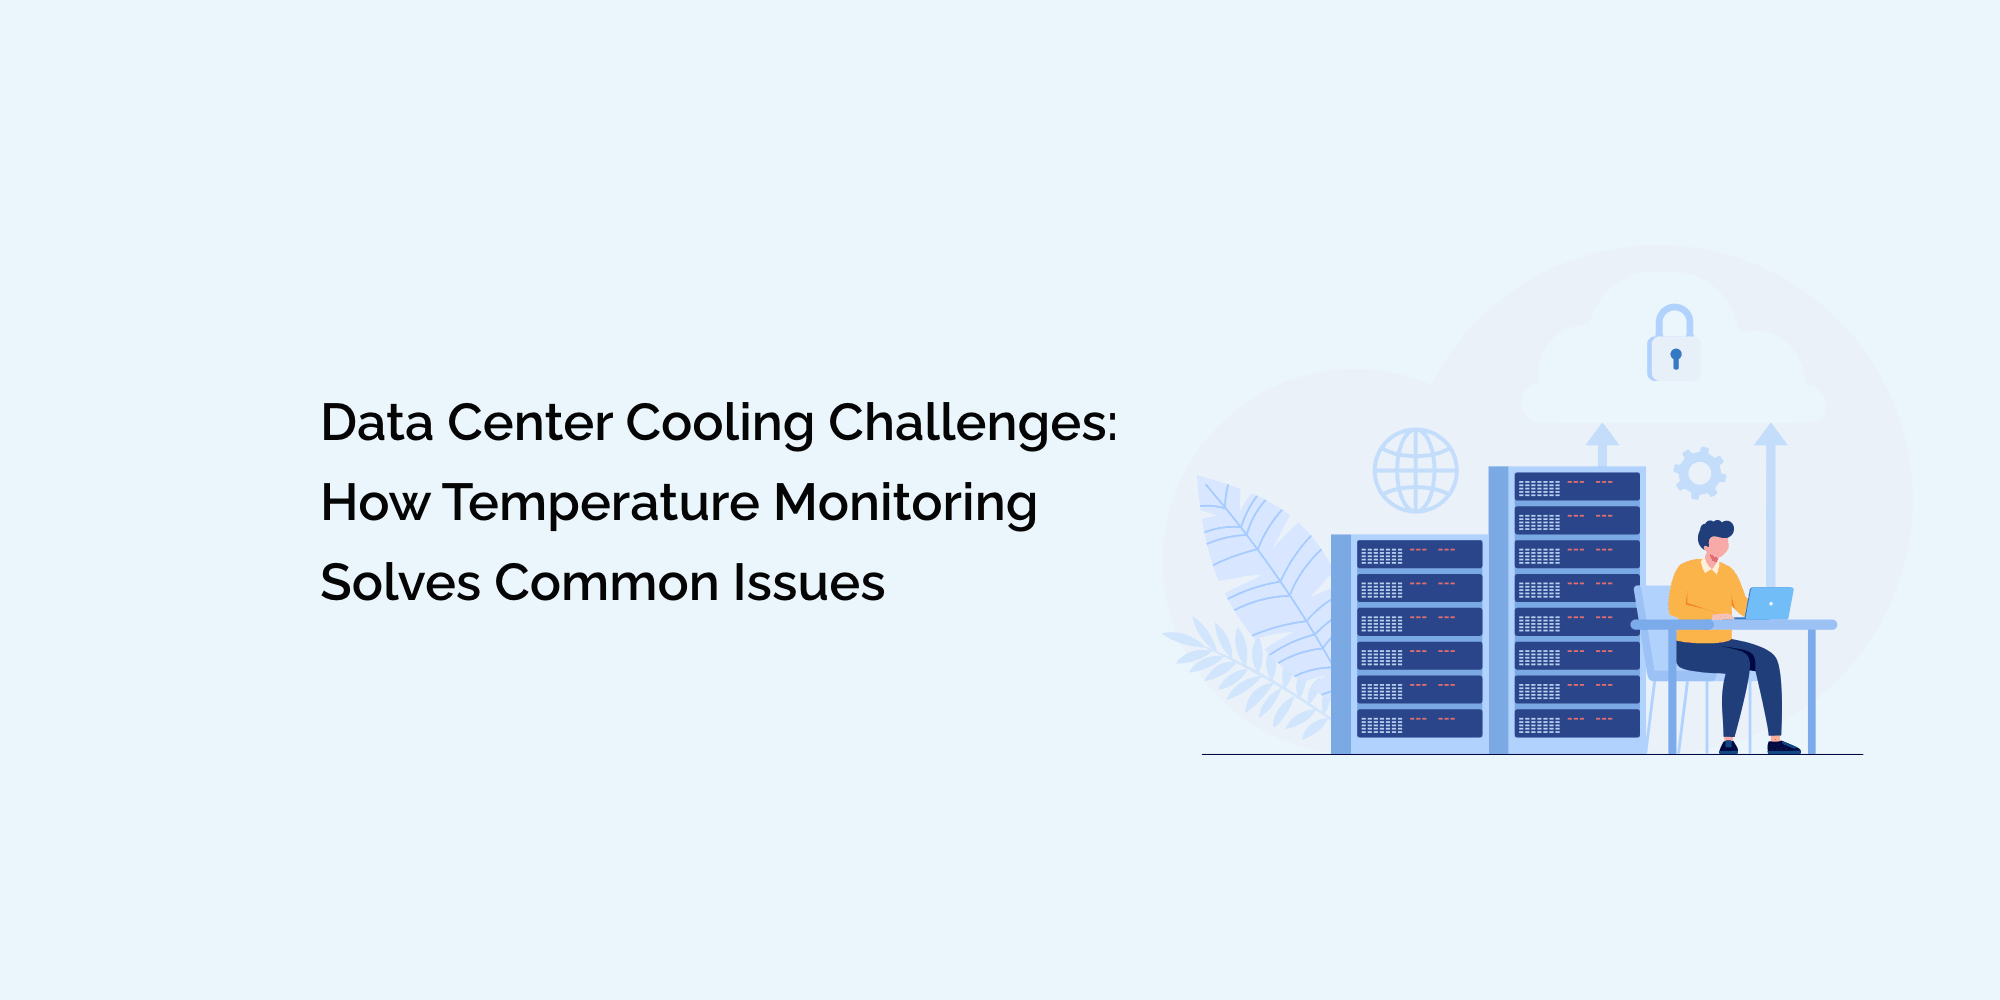 Data Center Cooling Challenges: How Temperature Monitoring Solves Common Issues